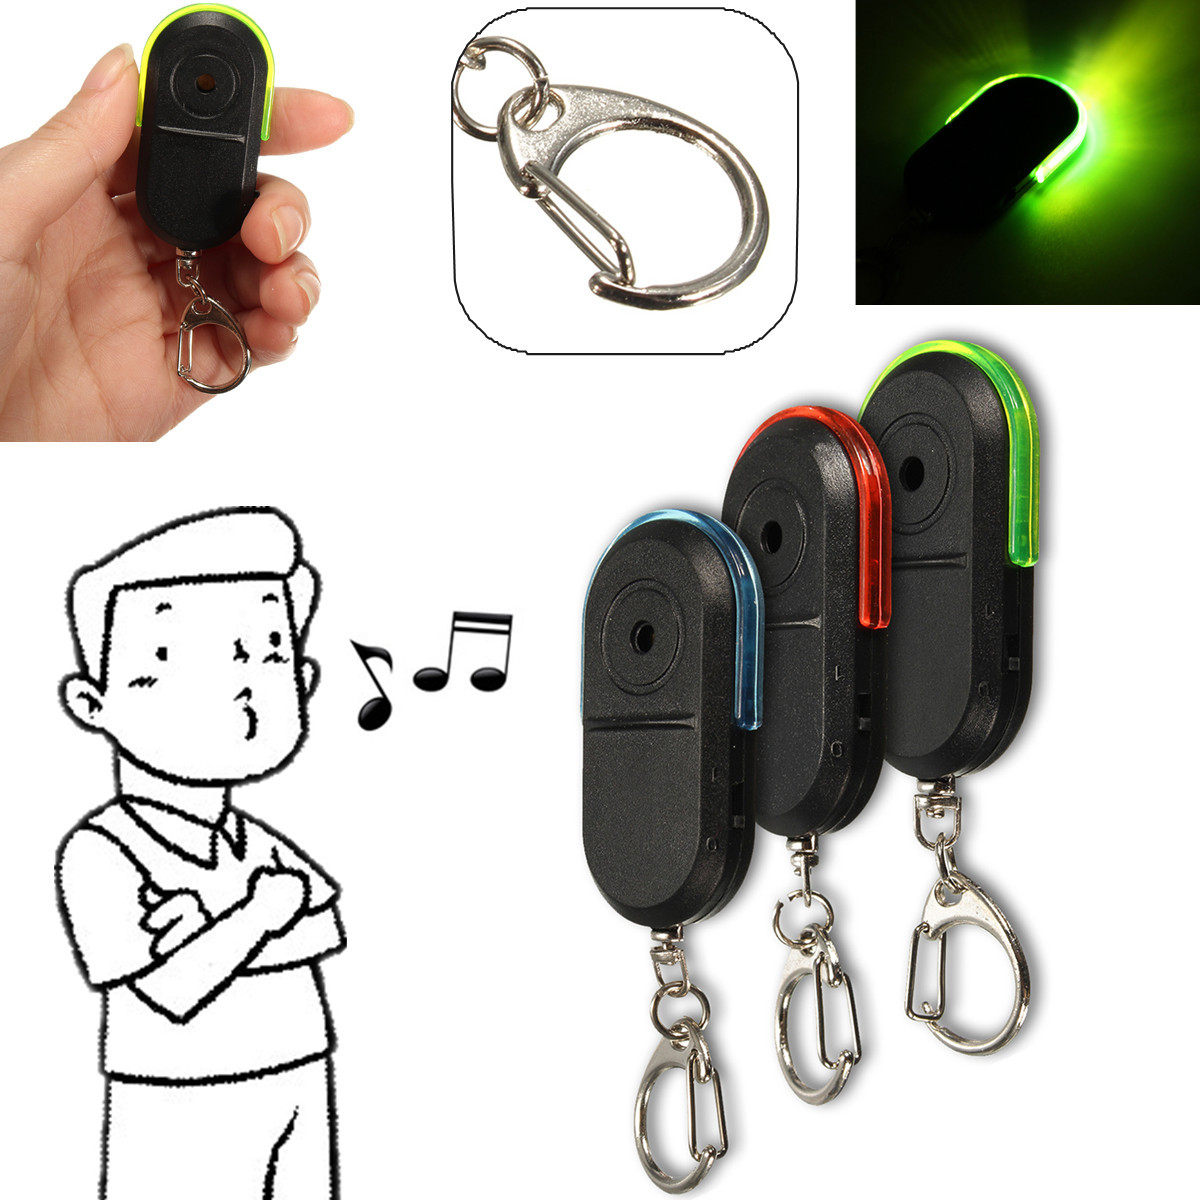 Wireless-Anti-Lost-Alarm-Key-Finder-Locator-Keychain-Whistle-Sound-with-LED-Light-1030593-2